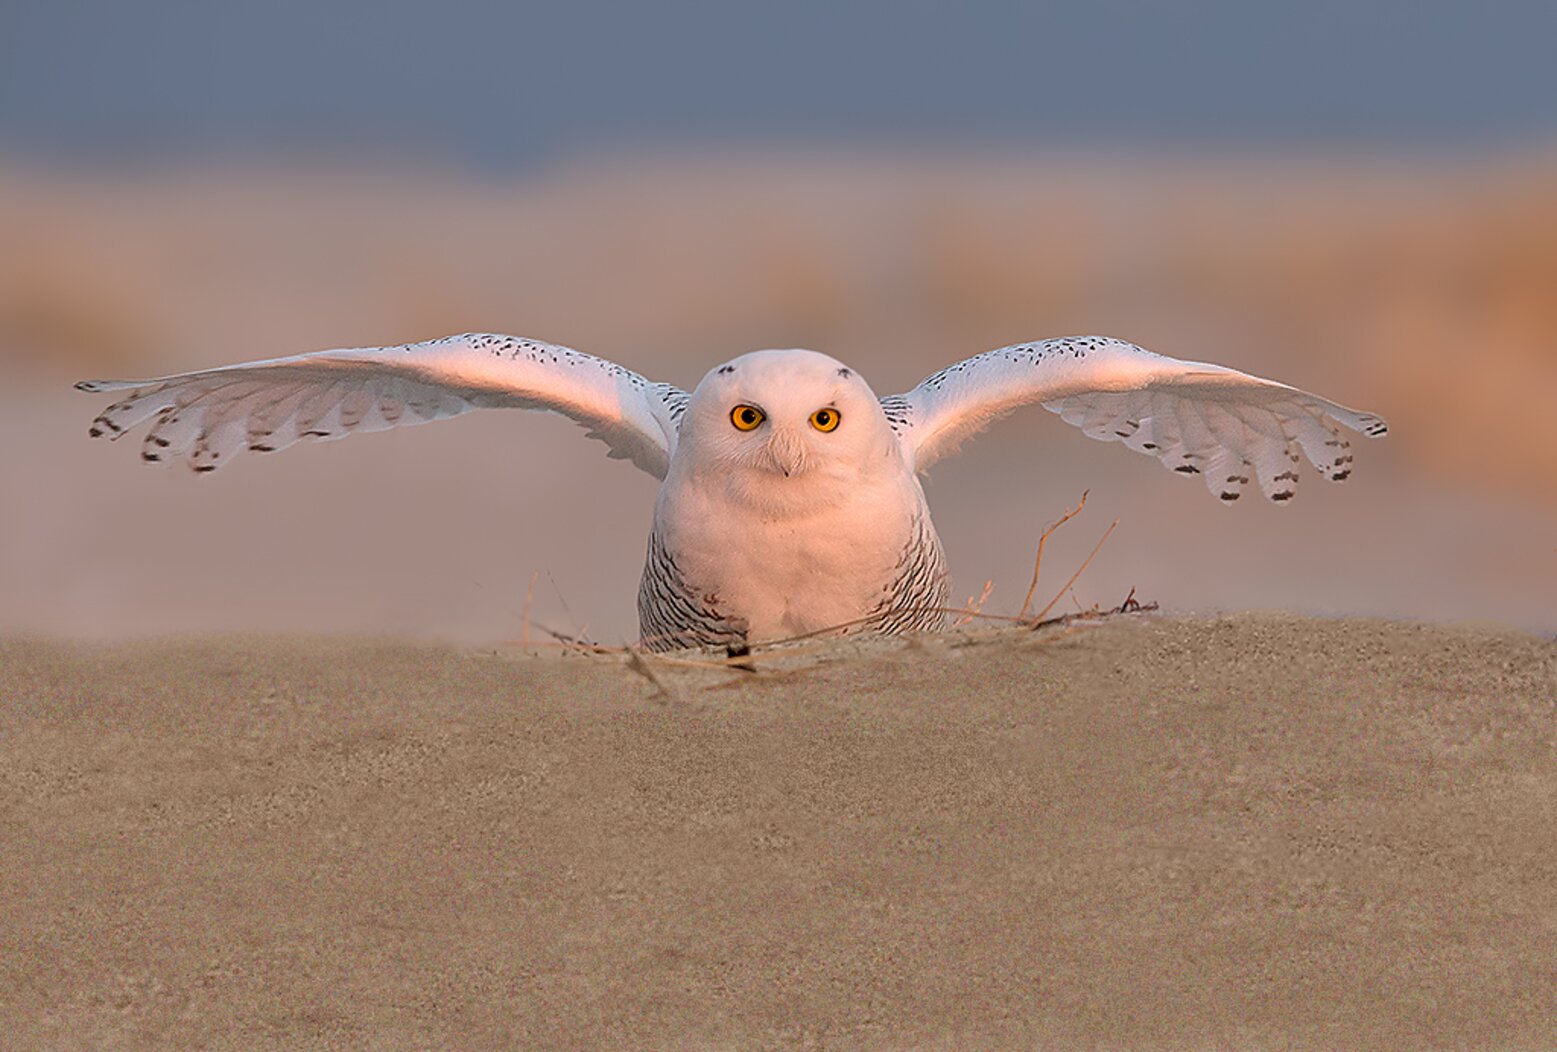 The open beaches and grasslands of New York City provide productive habitat for the Snowy Owl. Photo: <a href="https://www.lilibirds.com/" target="_blank">David Speiser</a>